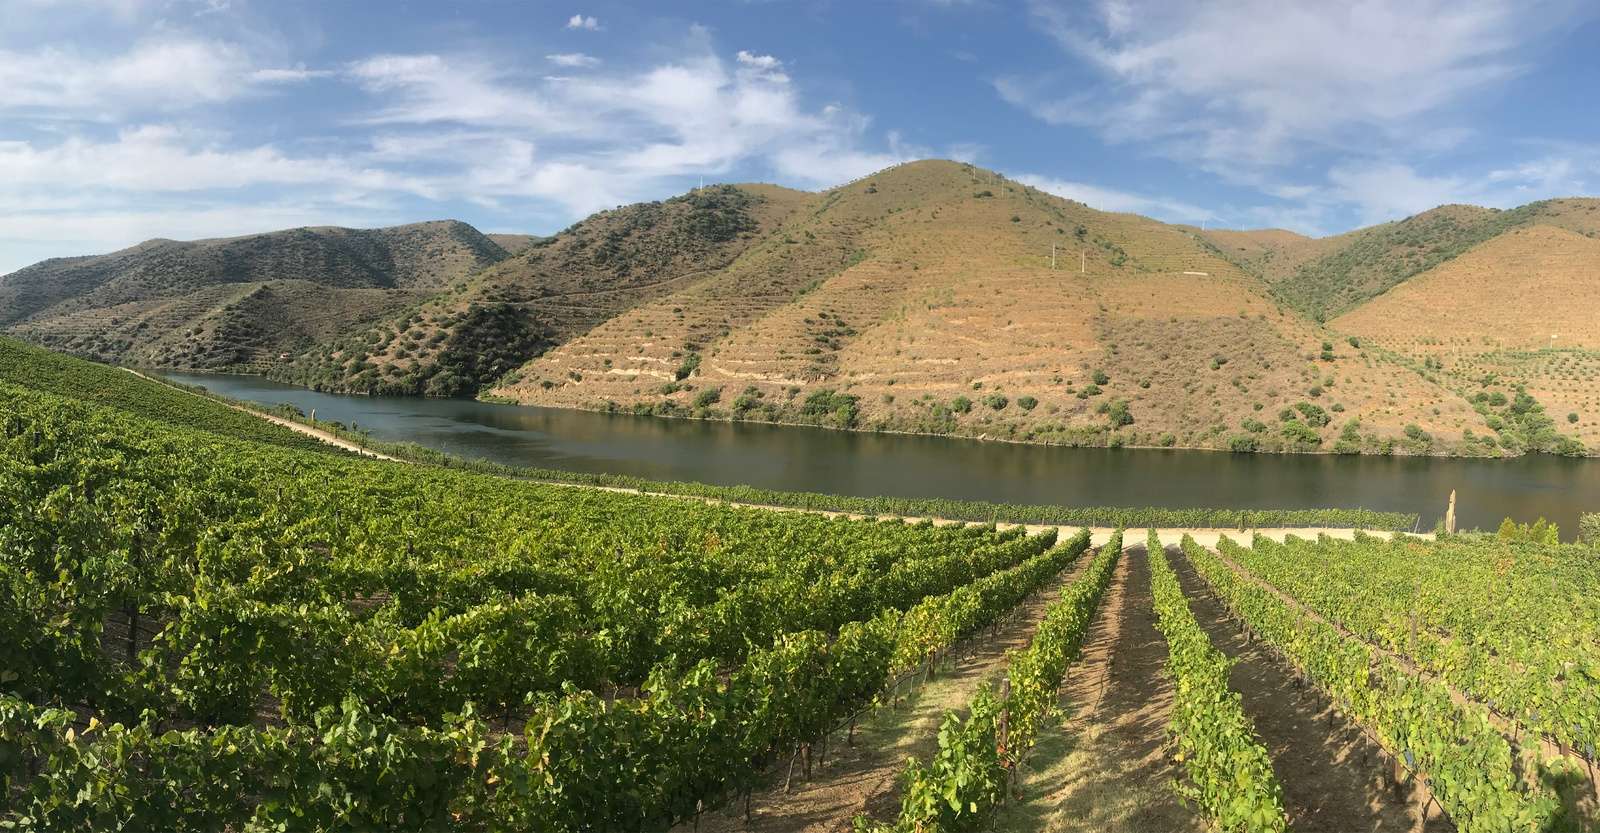 Vineyard and Douro River, Douro Valley, Portugal.